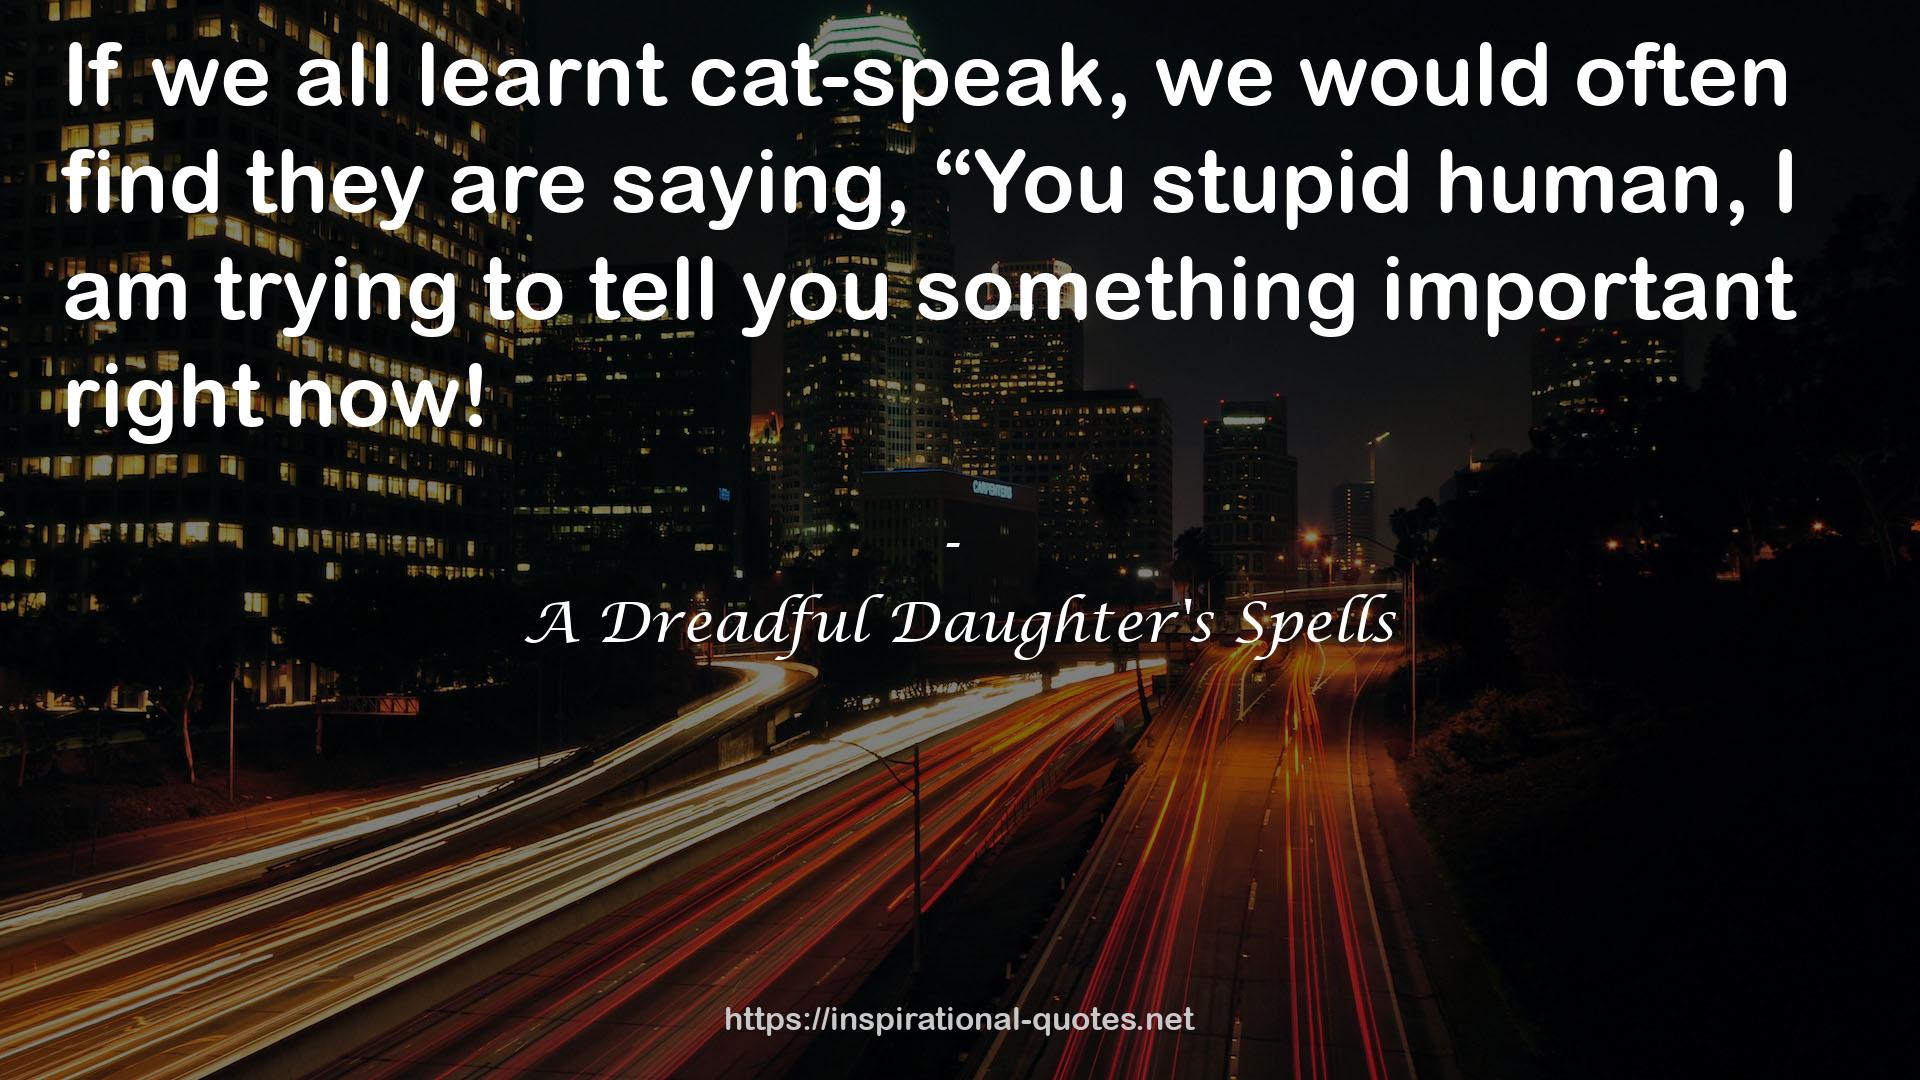 A Dreadful Daughter's Spells QUOTES